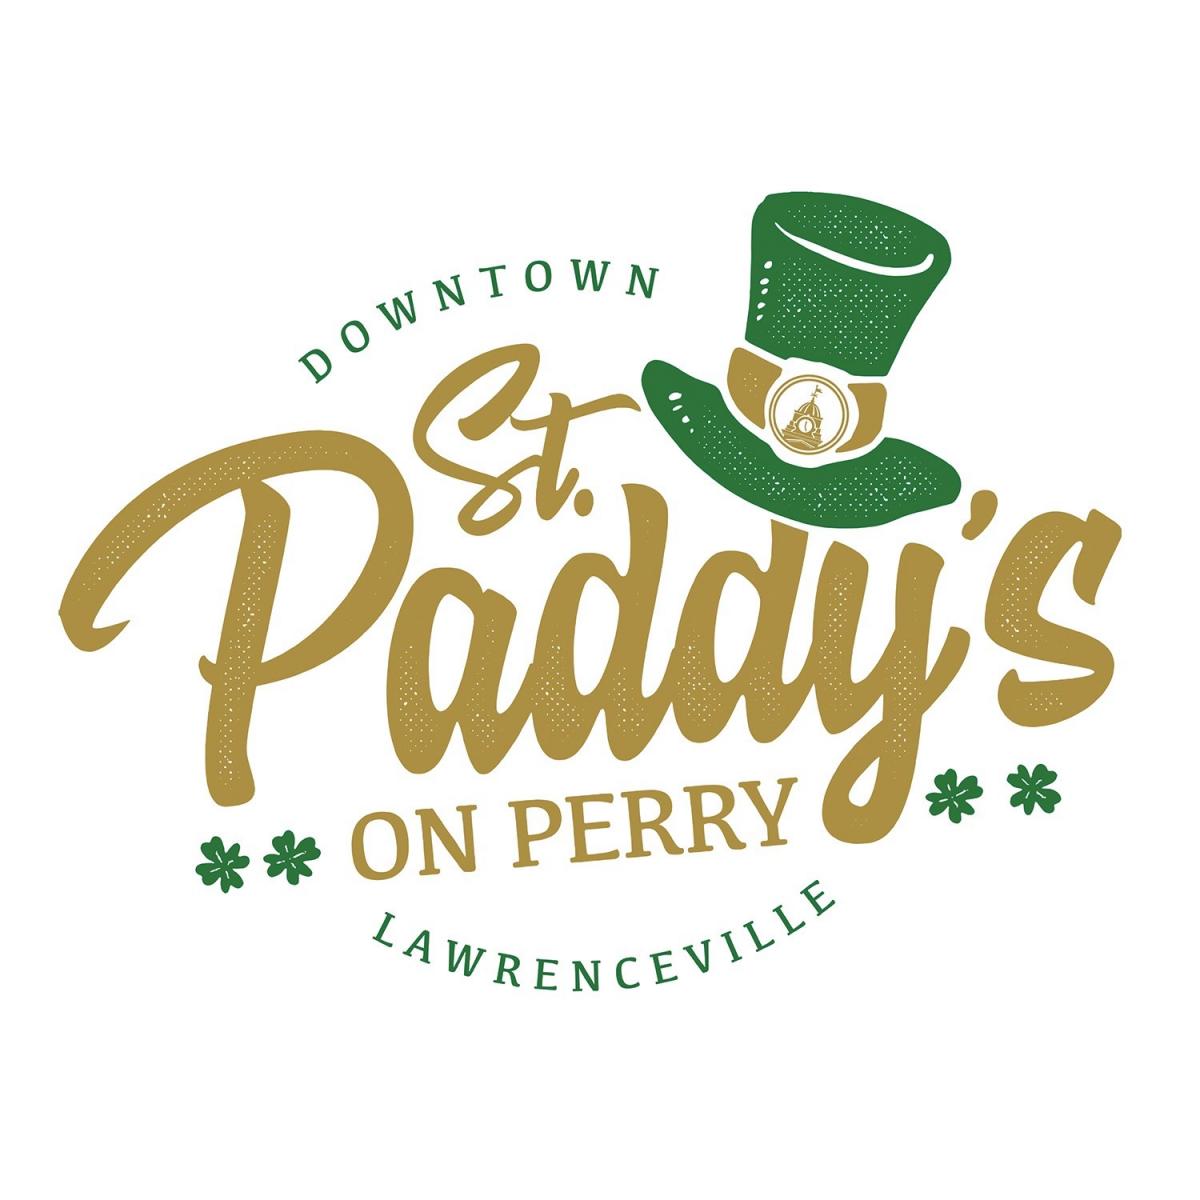 St Paddy's on Perry